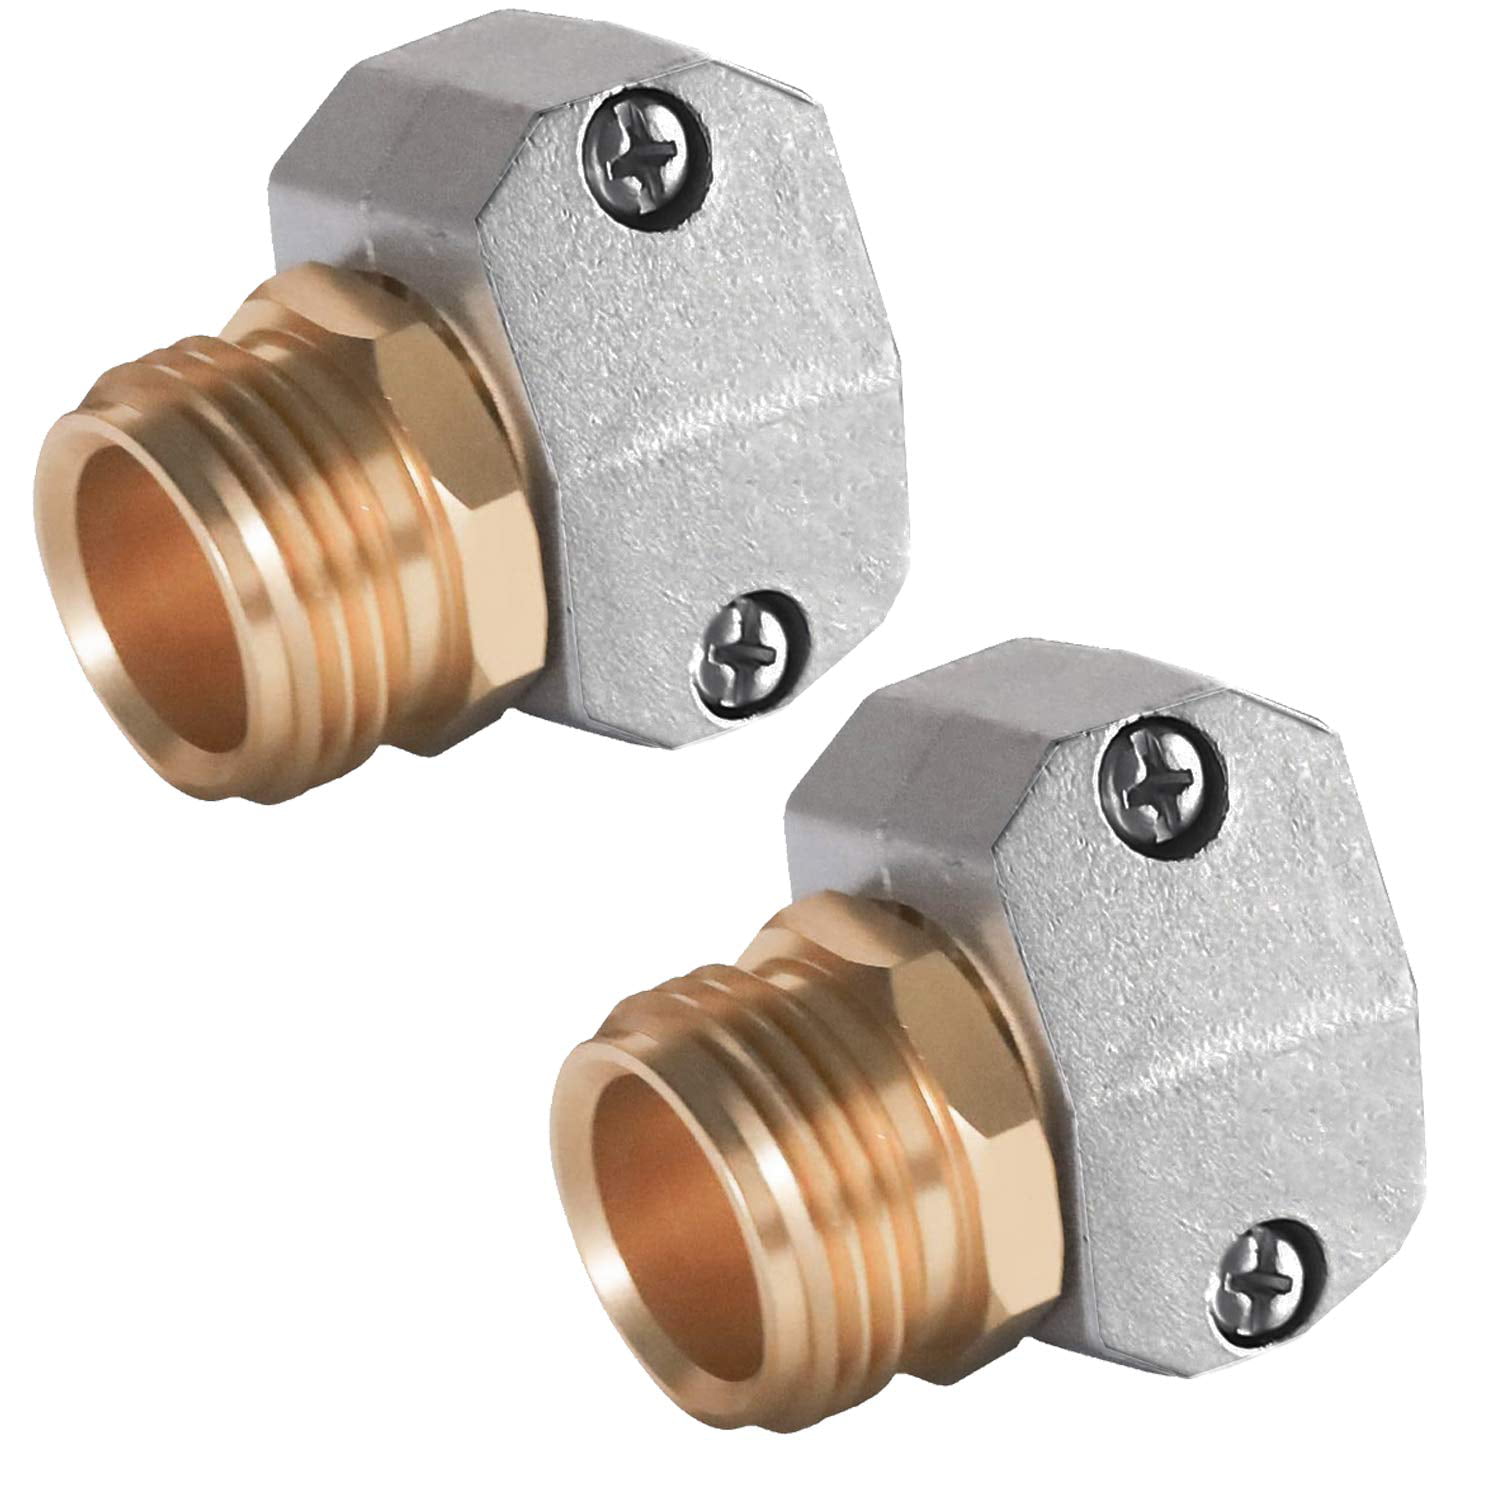 Details about   1/2" 3/4" 1" Brass Male/Female Thread Coupler Connector Pipe Fitting Adapter 